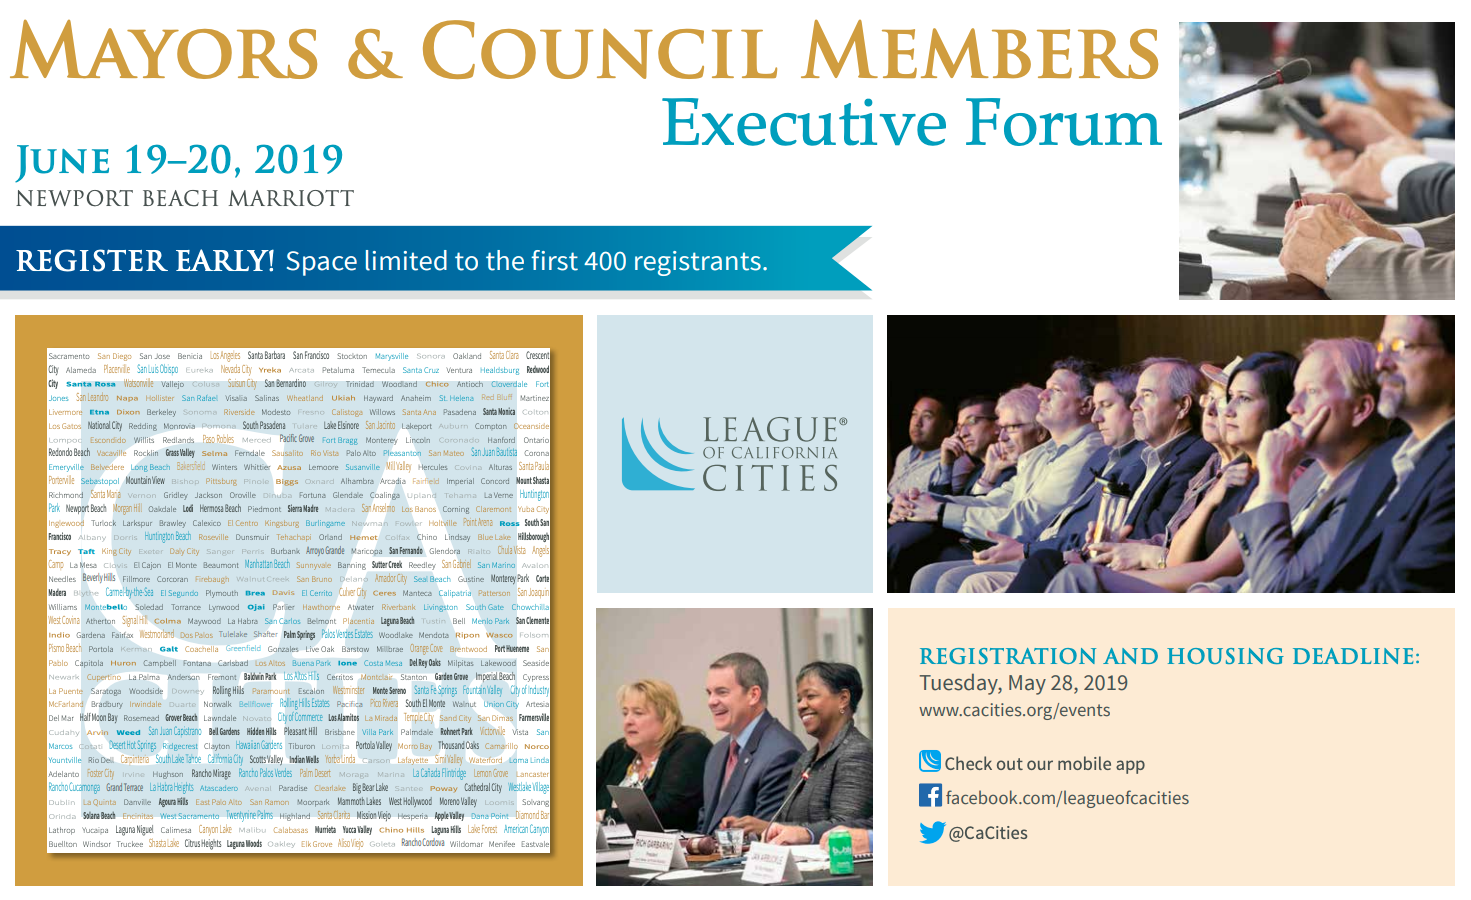 2019 Mayors and Council Members Executive Forum